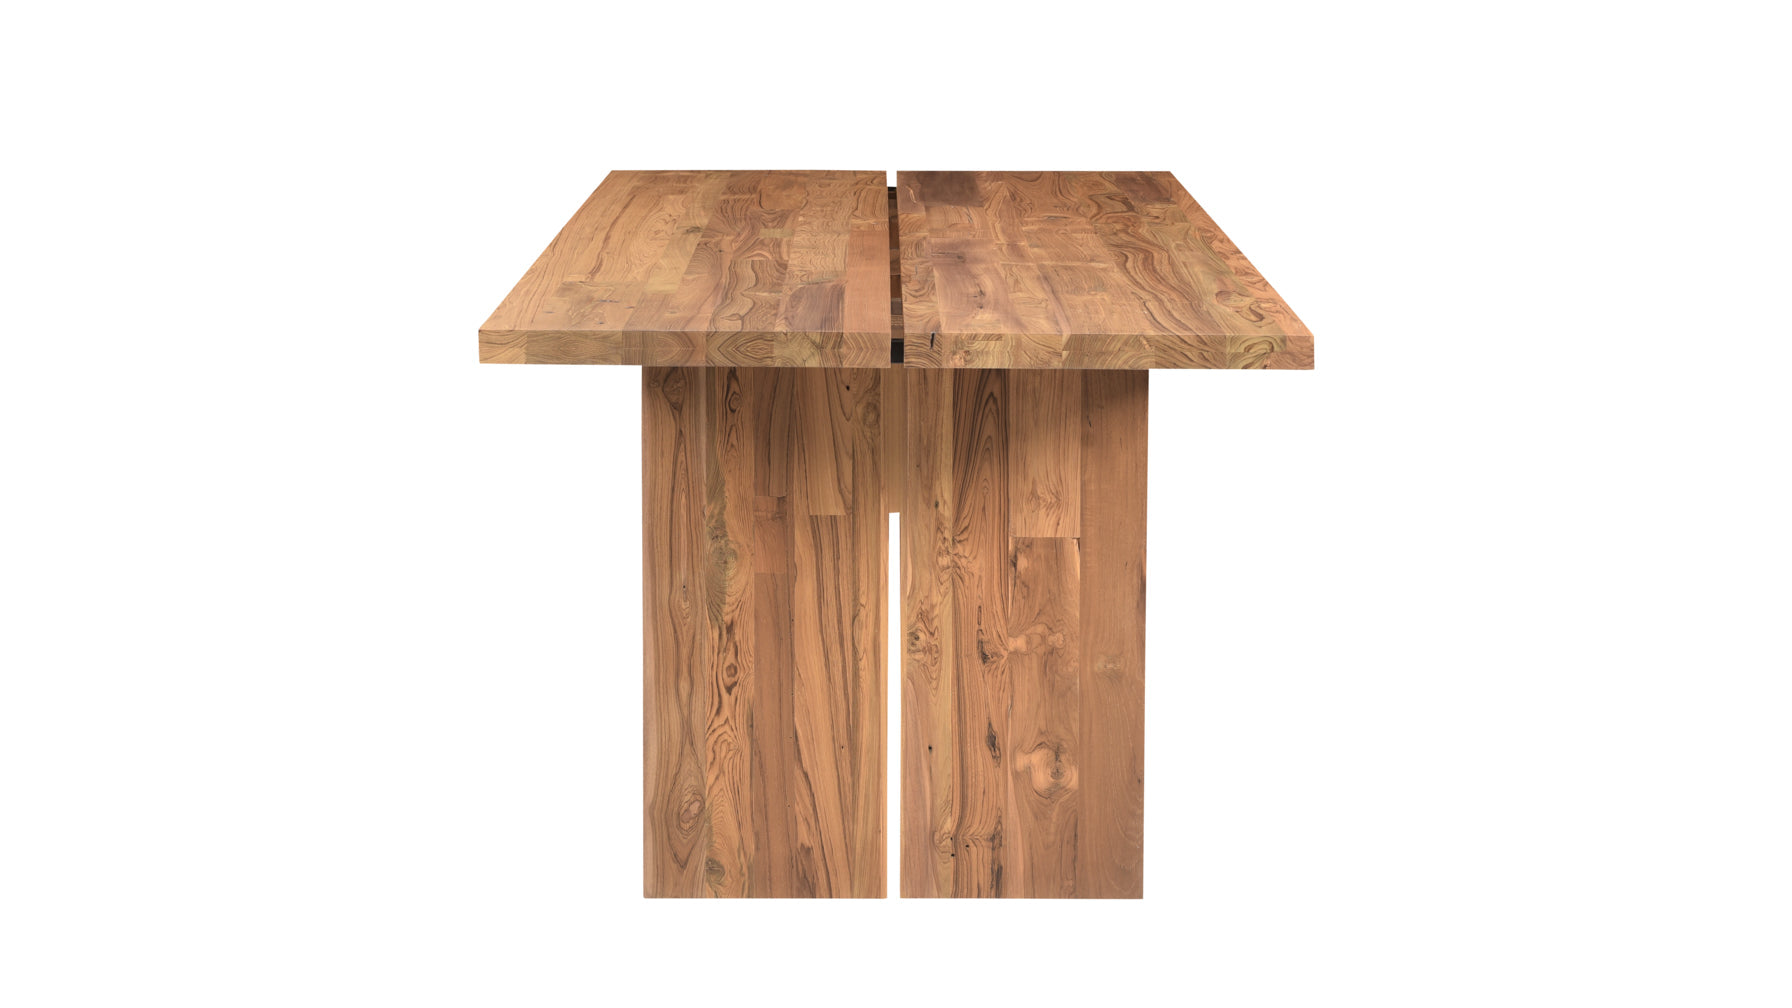 Plane Outdoor Dining Table, Seats 6-8, Teak - Image 3